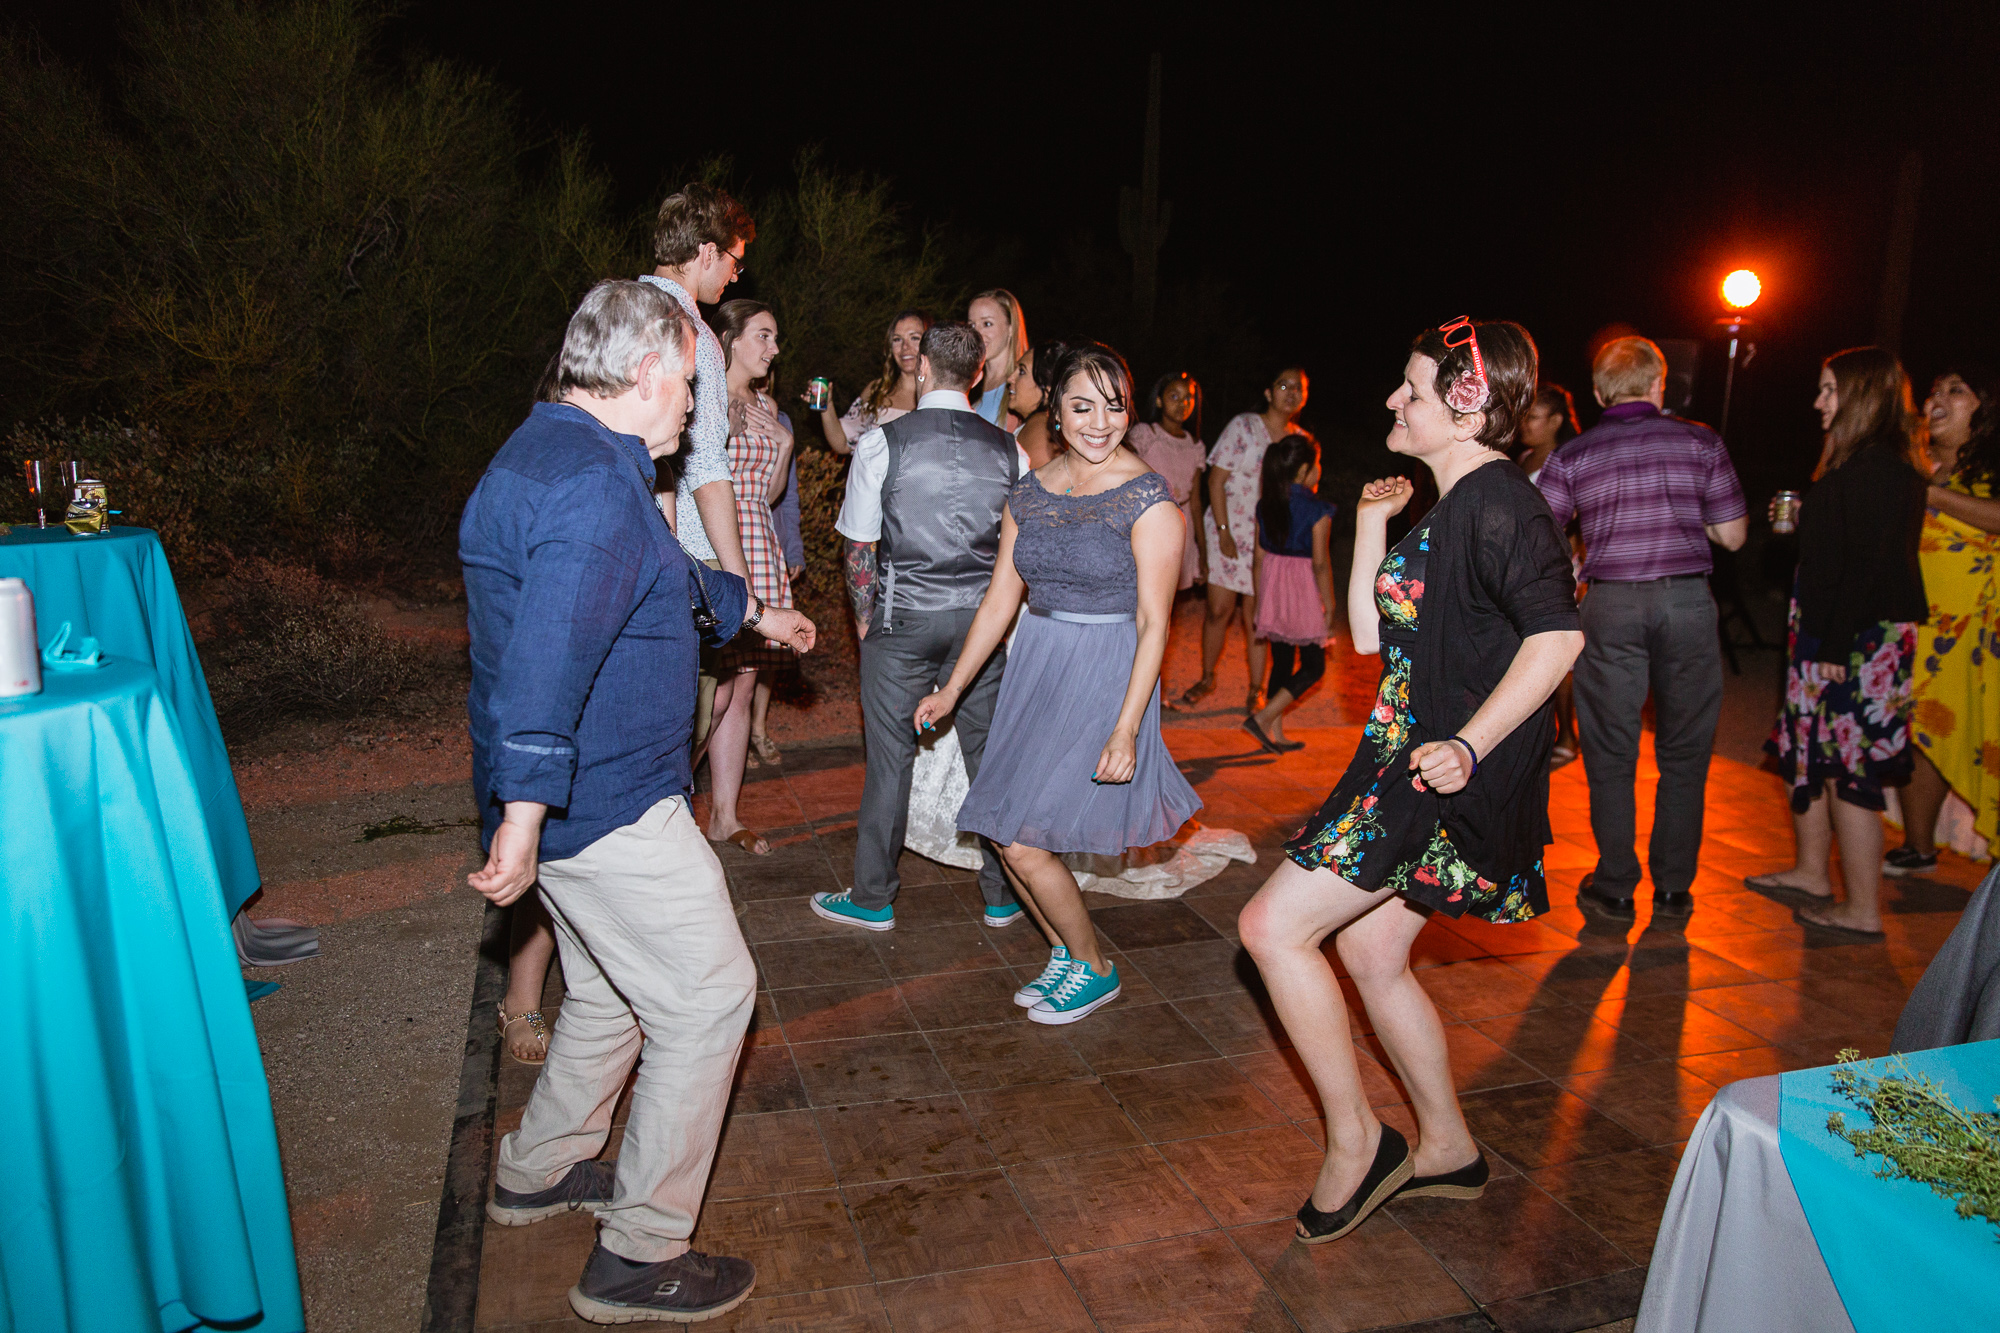 Guests dancing at a wedding reception by Arizona wedding photographer PMA Photography.